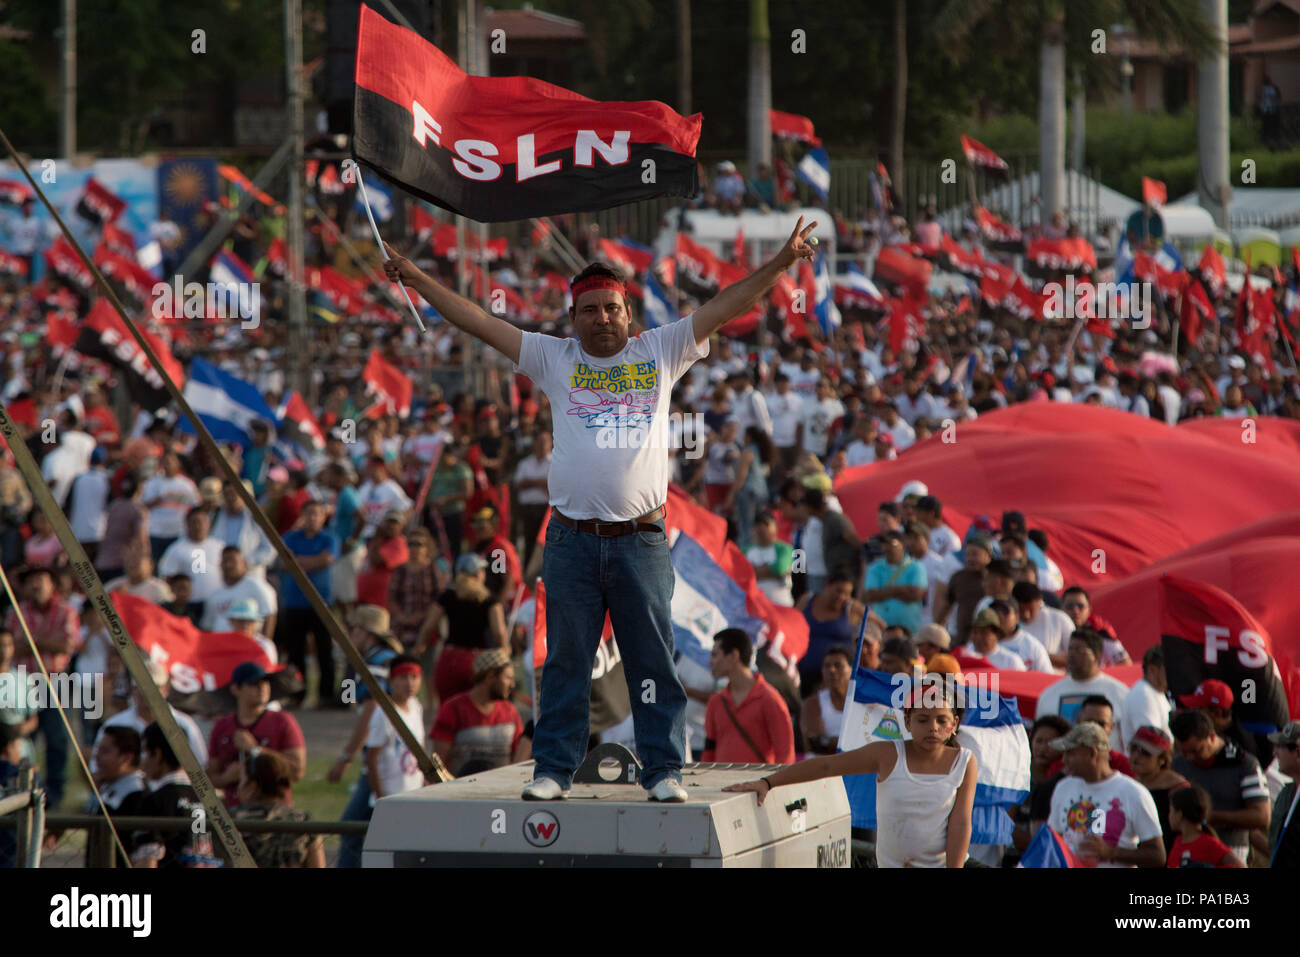 Managua, Nicaragua. 19th July, 2018. A supporter of the Sandinista National Liberation Front (FSLN) taking part in an event in conmemoration of the 39th anniversary of the Sandinista revolution. The Nicaraguan president has accused the country's Catholic church of being part of an attempted coup against his government. According to Ortega, the country's Catholic bishops aren't intermediaries in the political crisis, but rather part of a putschist conspiracy. Credit: Carlos Herrera/dpa | usage worldwide/dpa/Alamy Live News Stock Photo